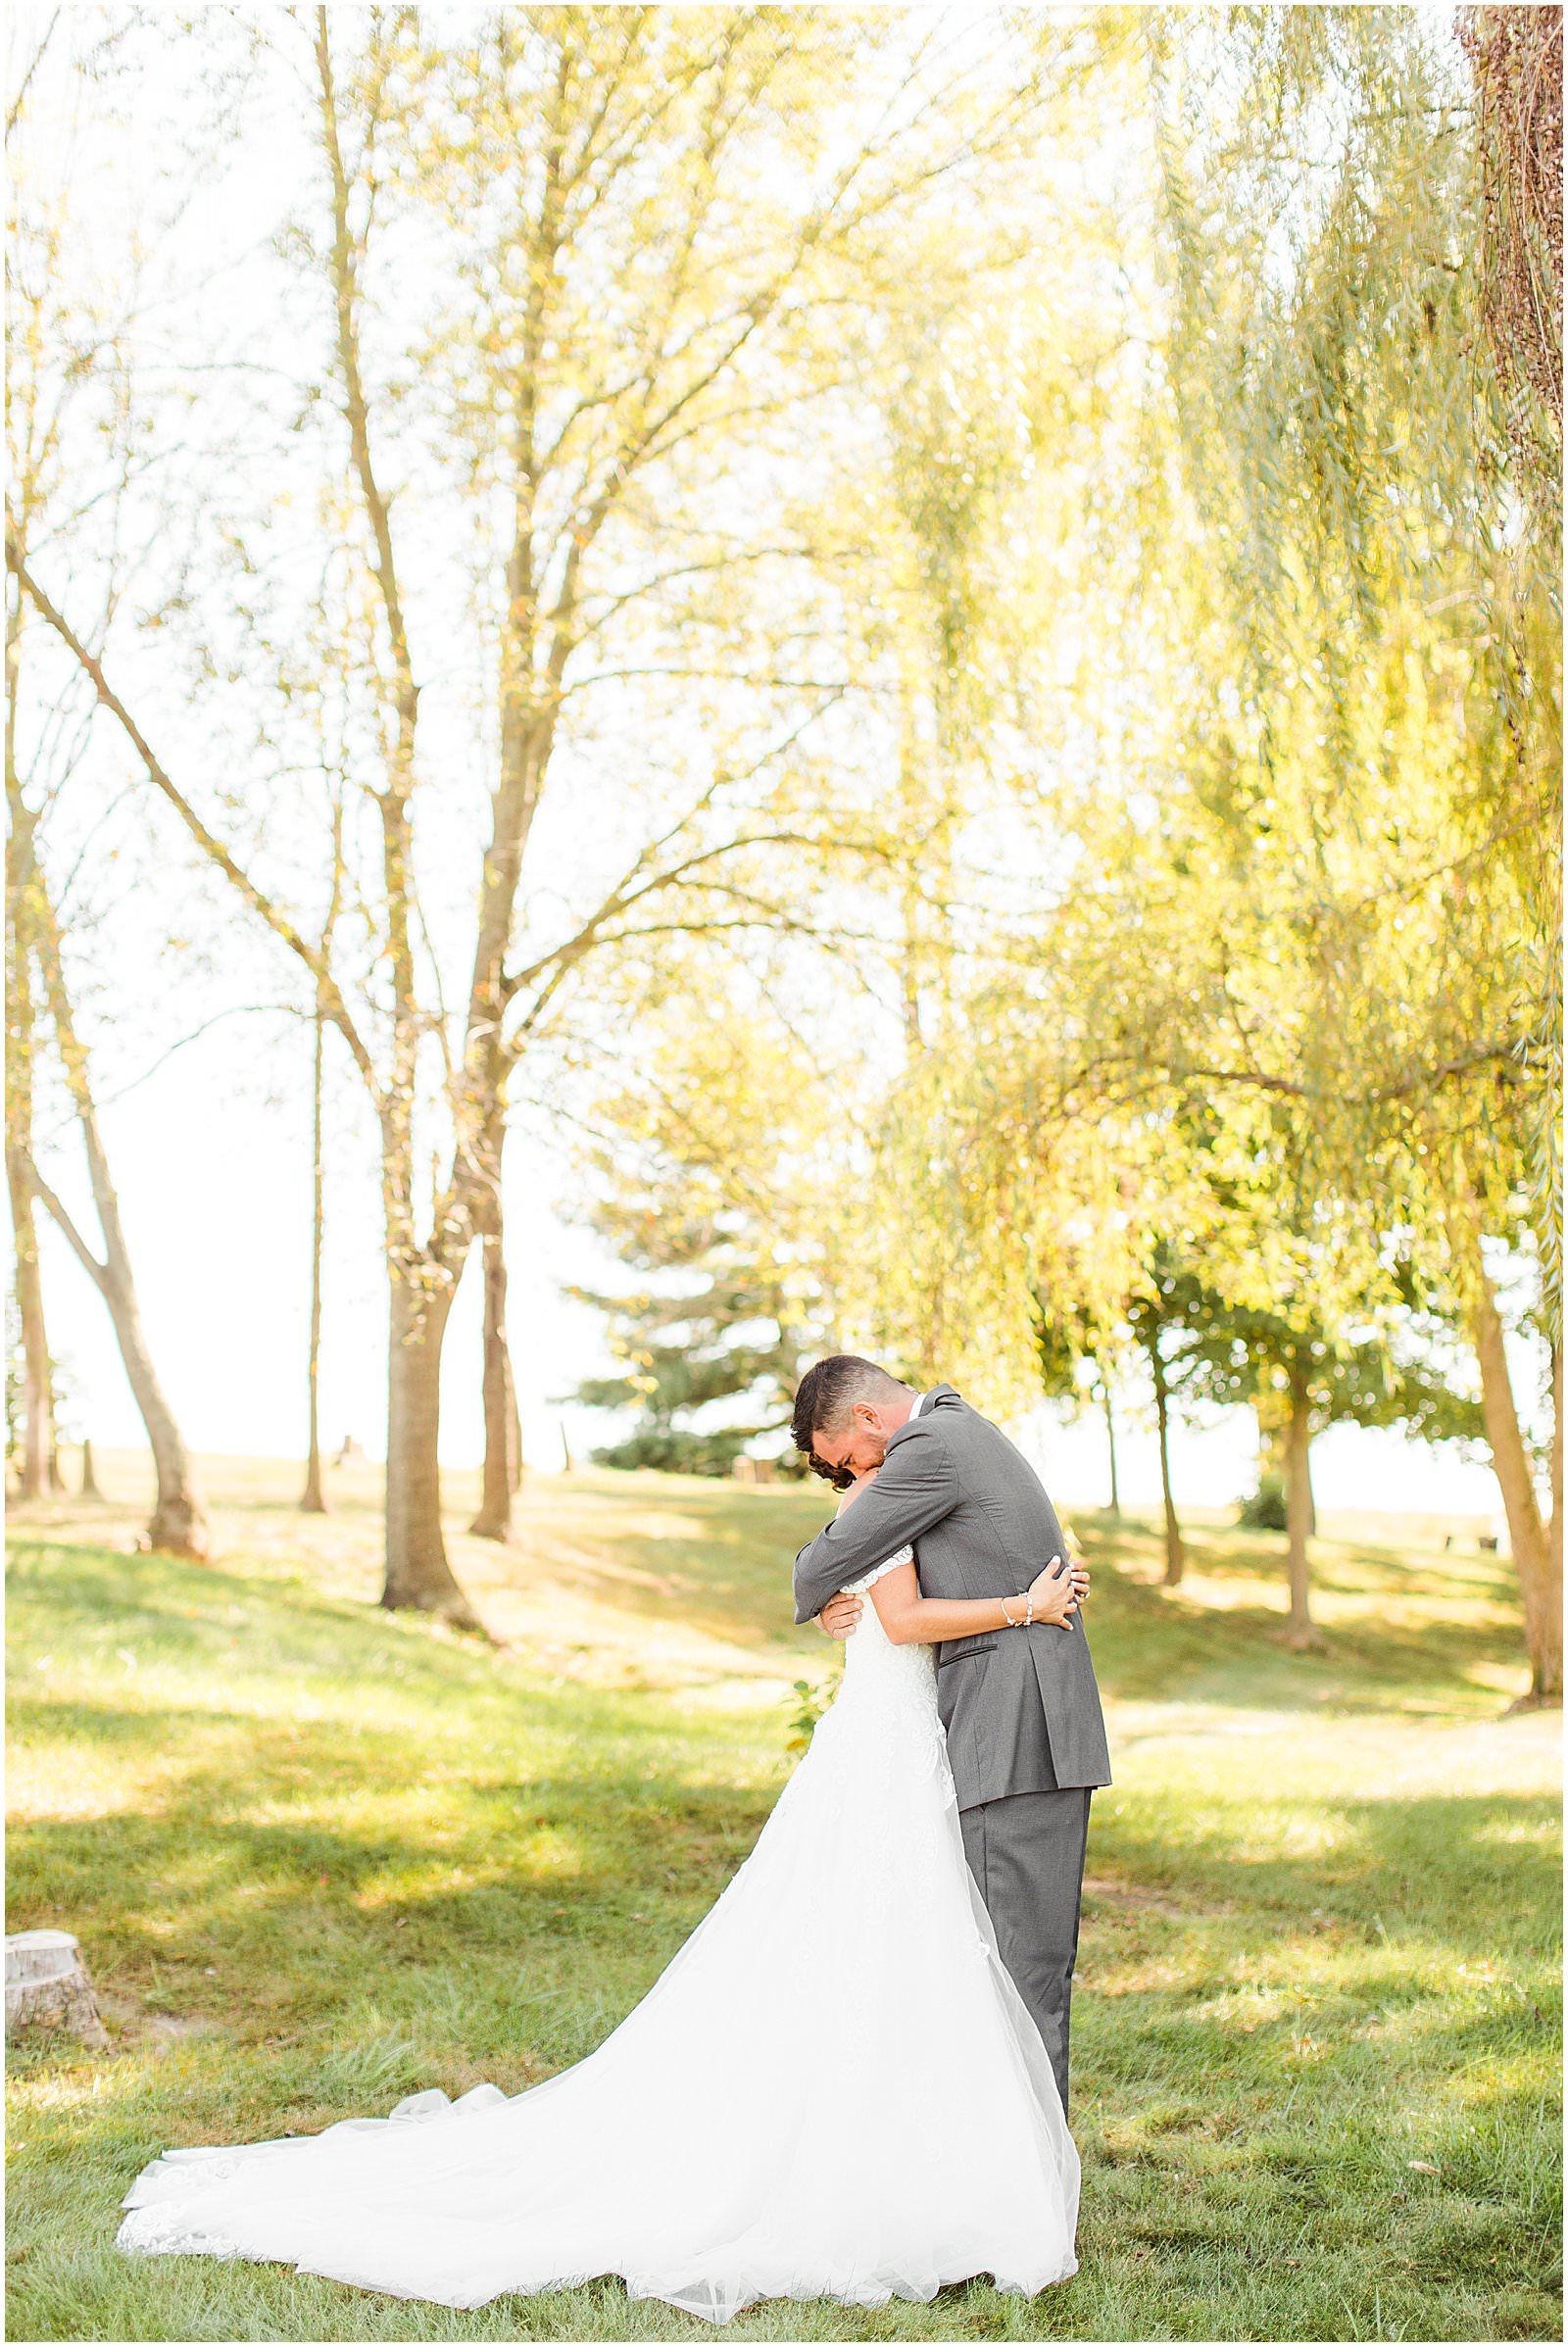 A Stunning Fall Wedding in Indianapolis, IN |. Sally and Andrew | Bret and Brandie Photography 0048.jpg